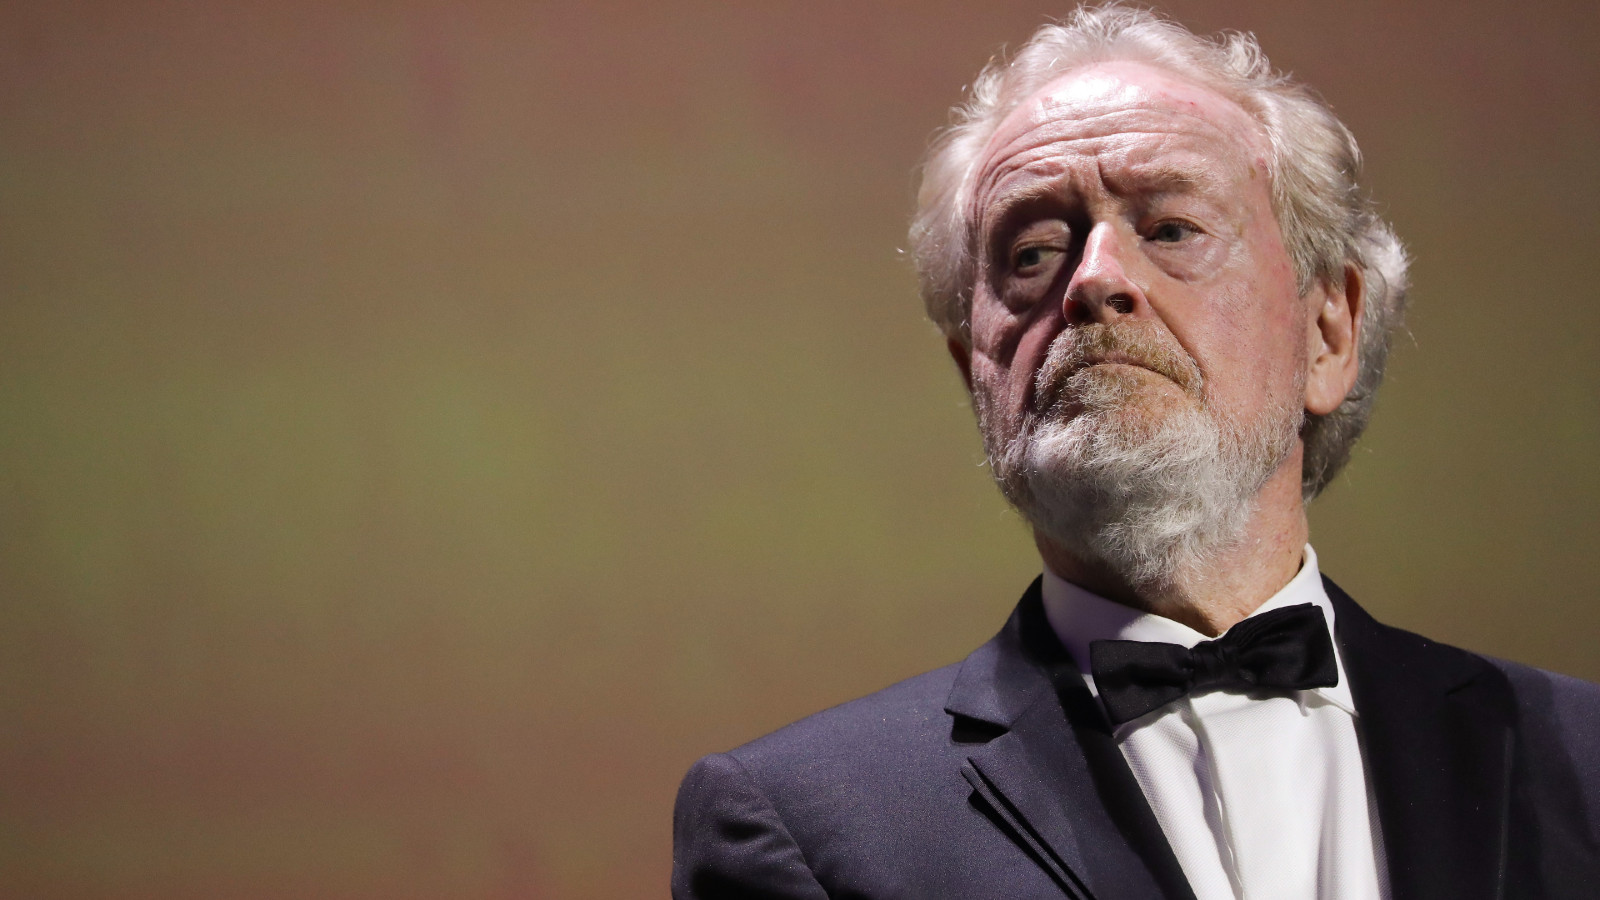 Ridley Scott at the Cartier Glory To The Filmmaker Award Ceremony - The 78th Venice International Film Festival